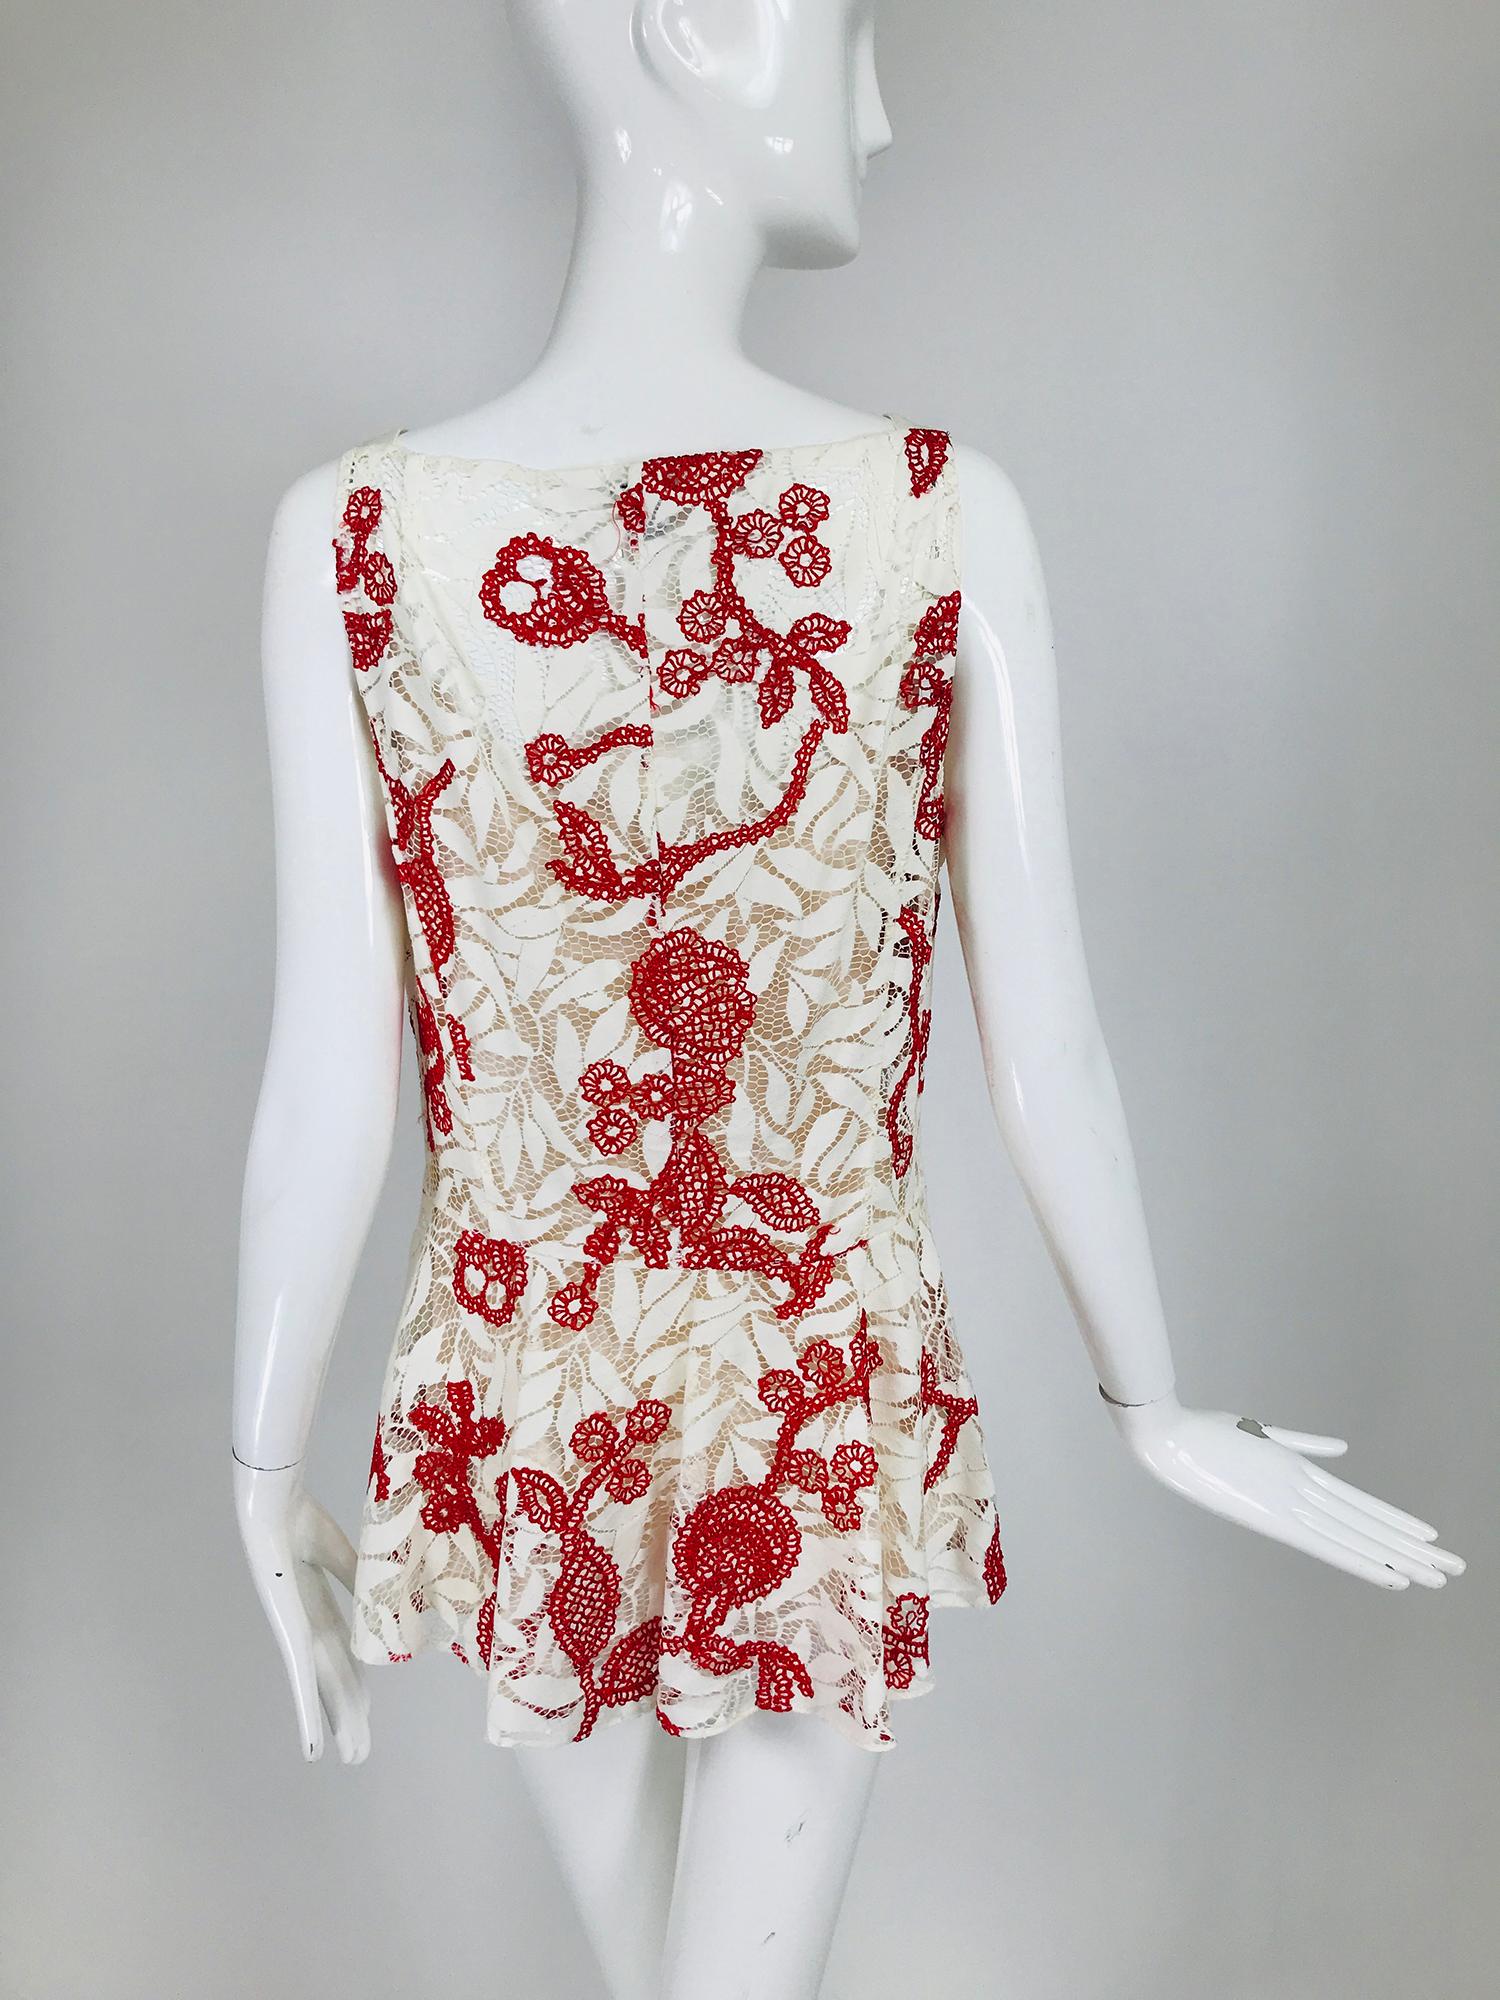 Oscar de la Renta Red and White Lace Tunic Top 12 In Good Condition For Sale In West Palm Beach, FL